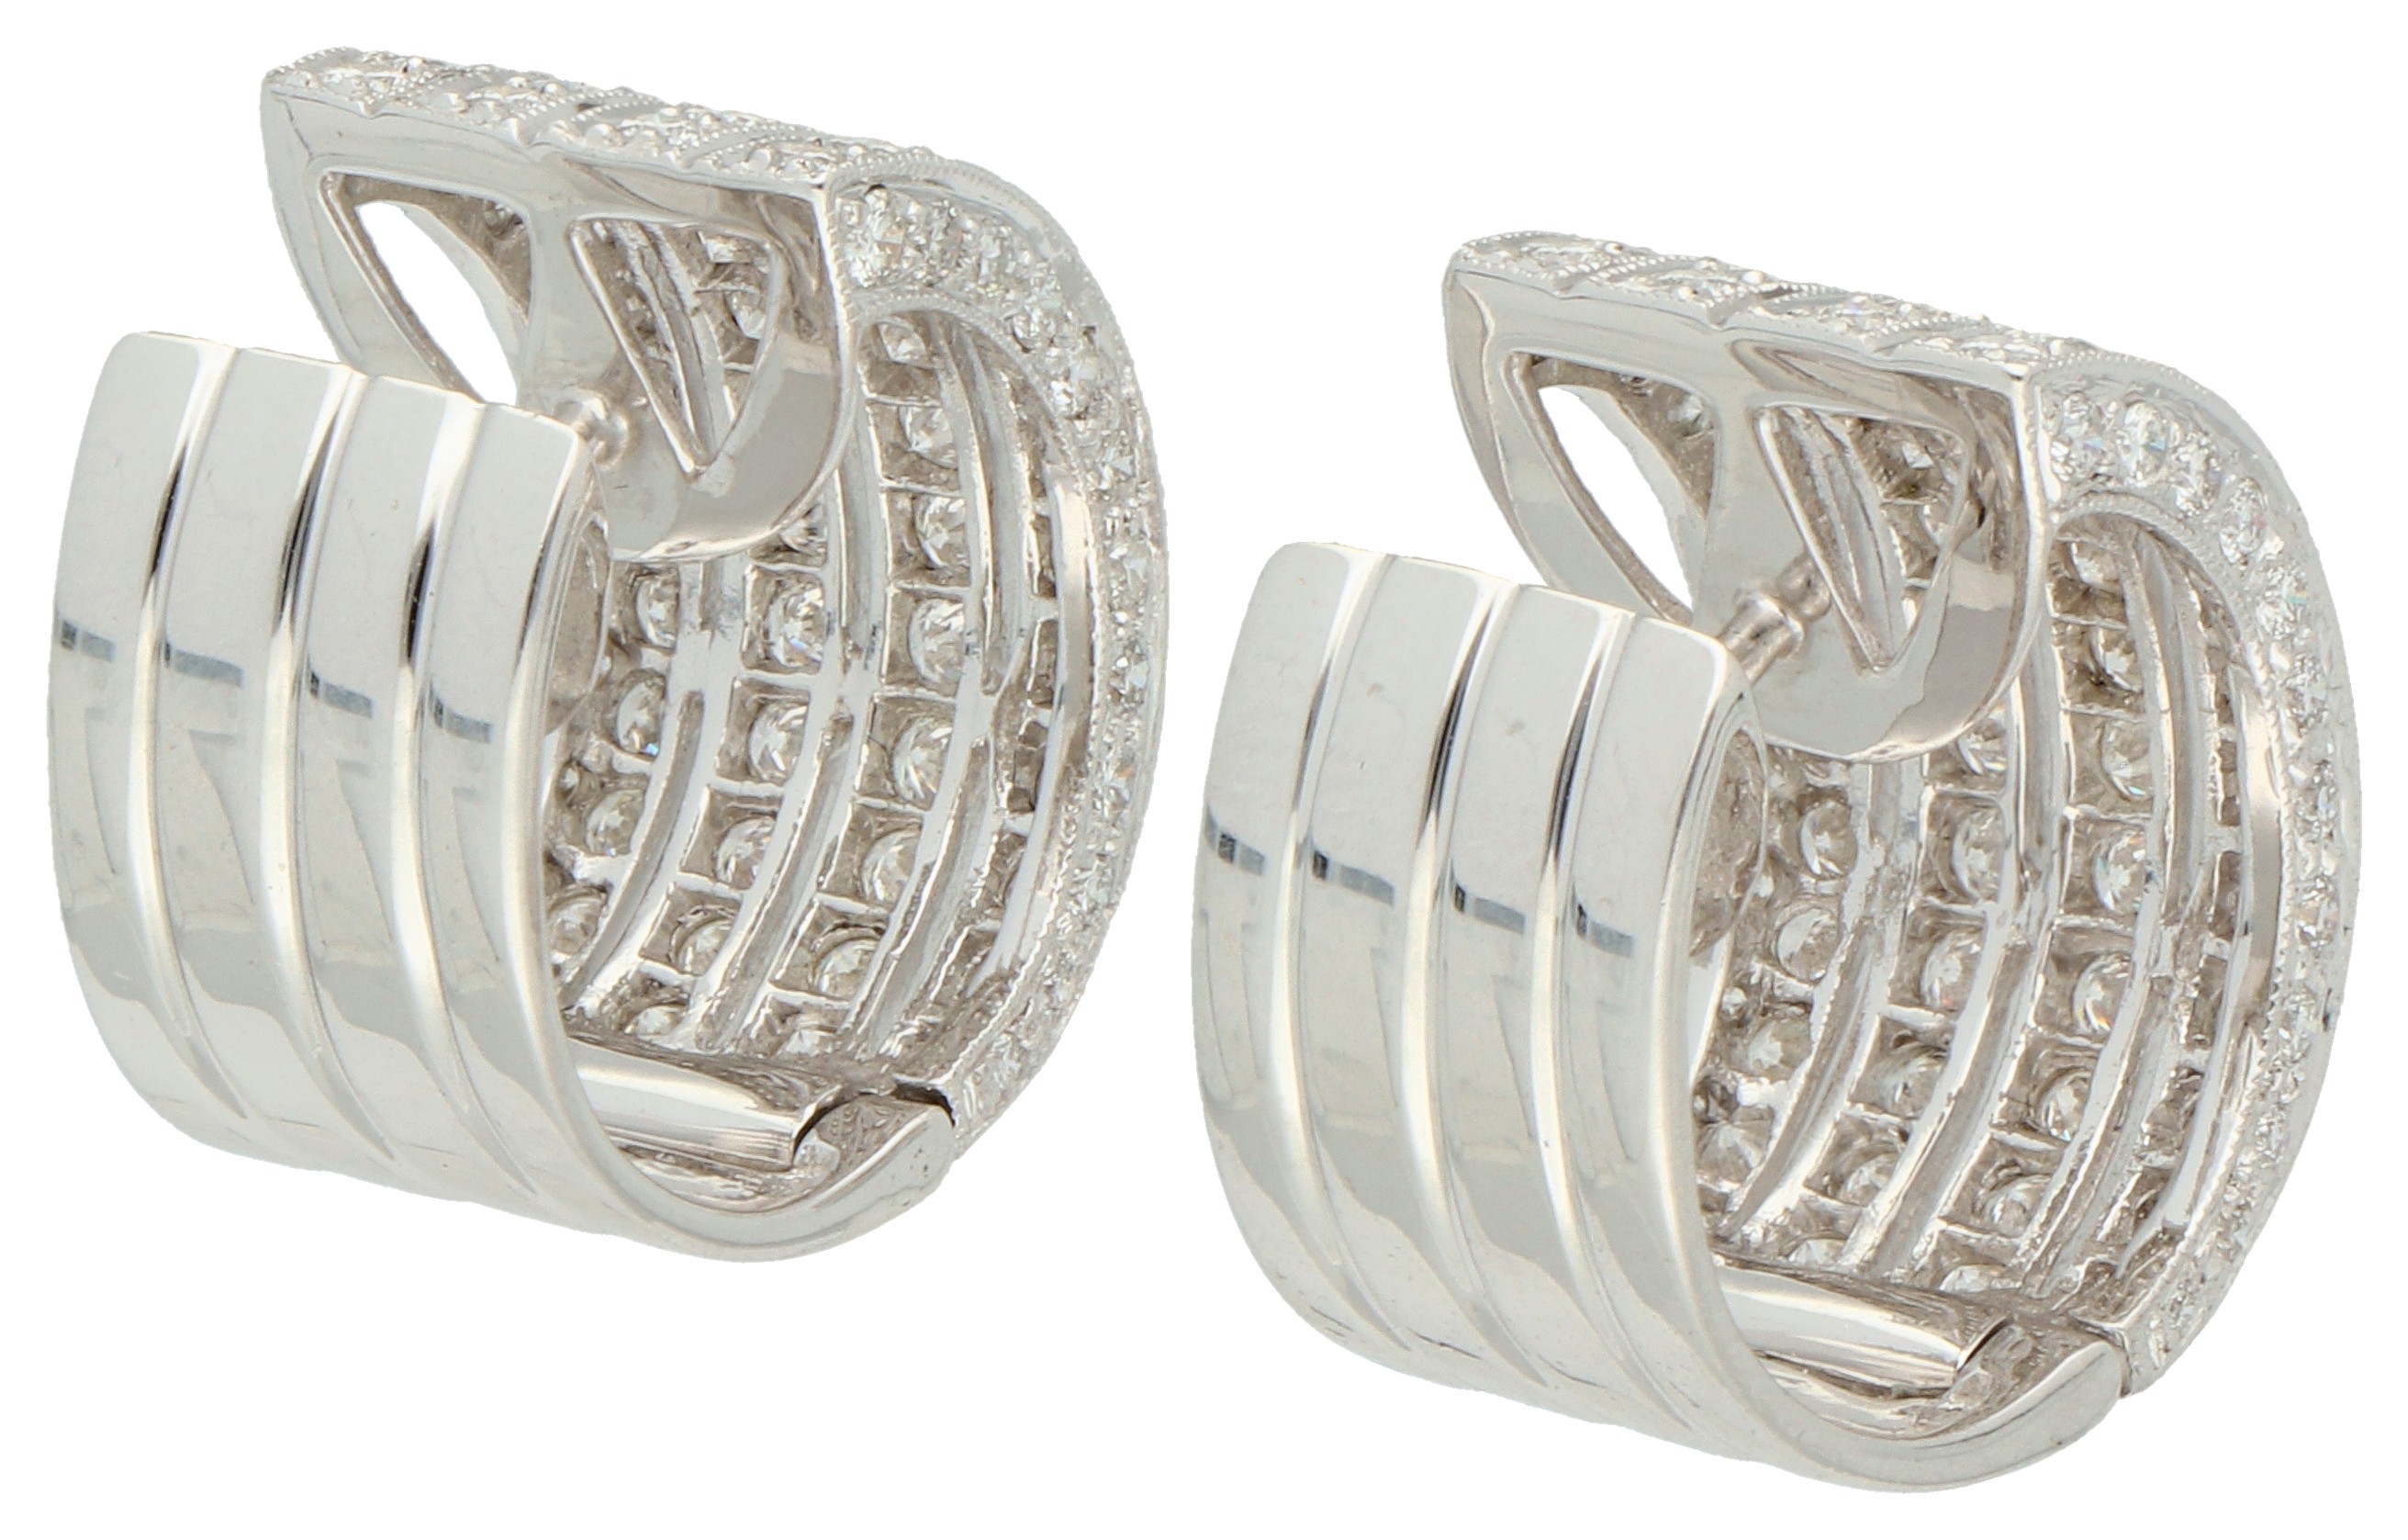 No Reserve - 18K White gold cylindrical stud earrings set with approx. 1.50 ct. diamonds. - Image 2 of 3